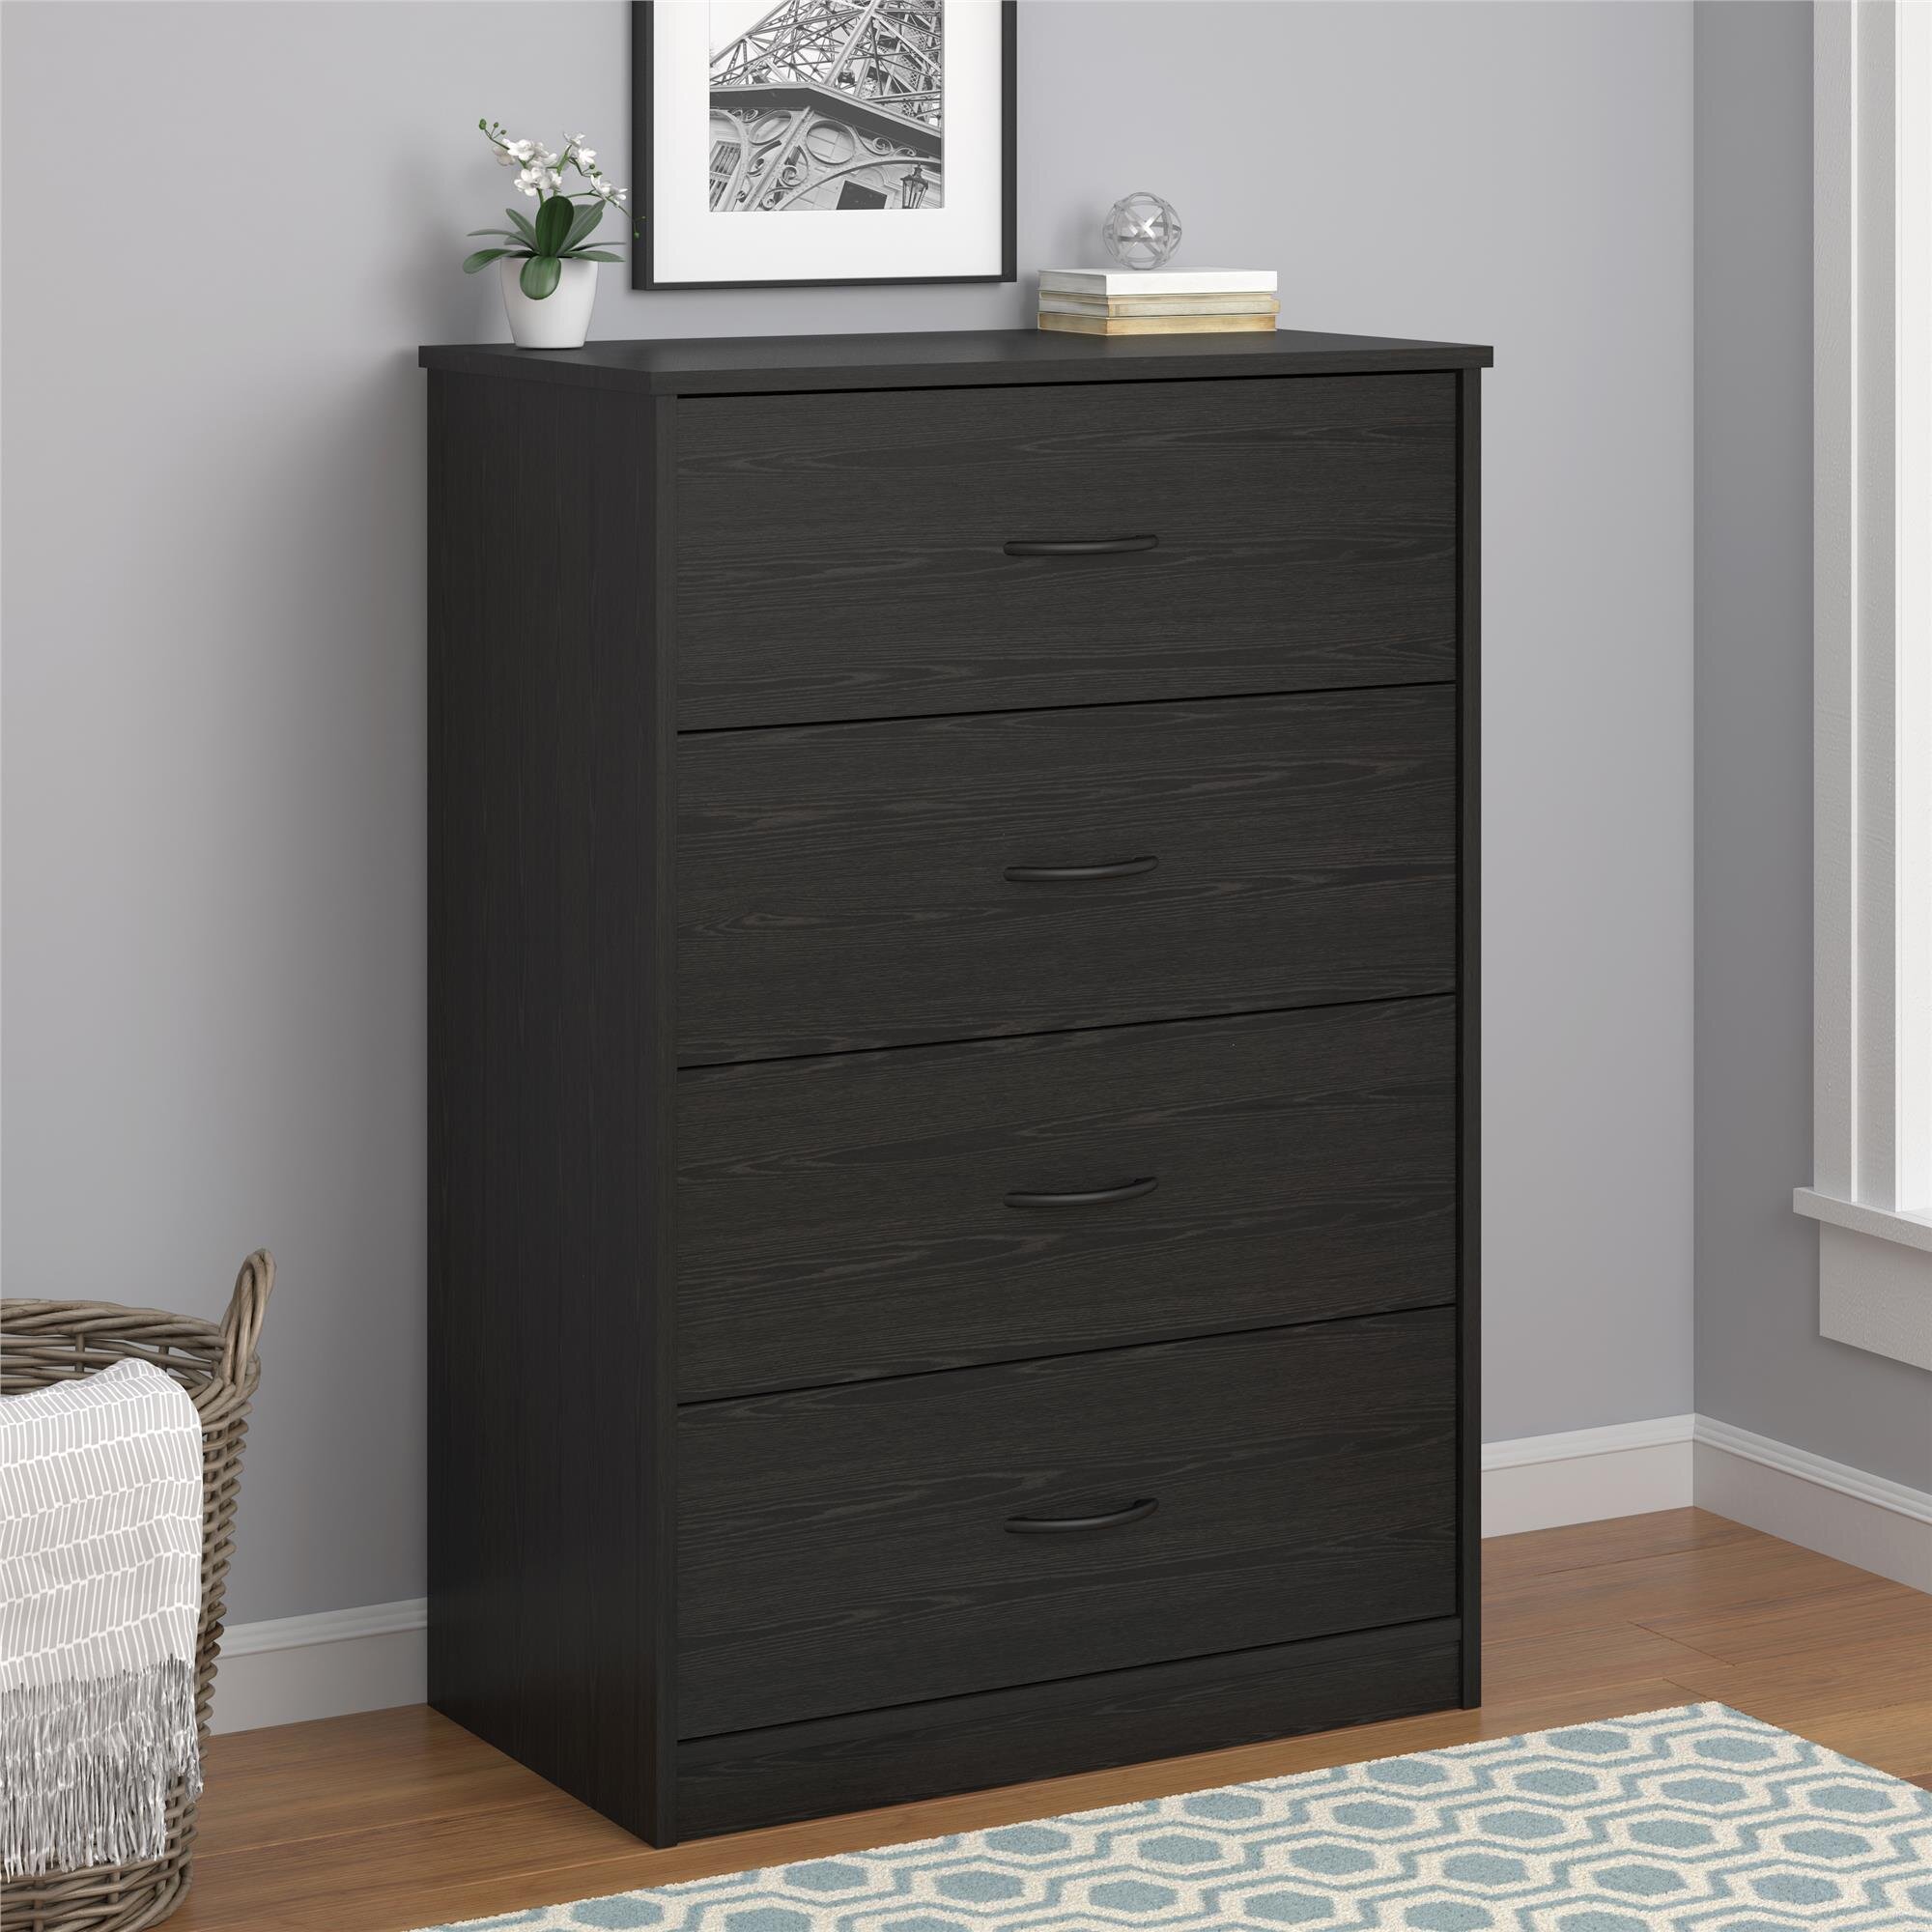 Black Tall Dressers Chests Free Shipping Over 35 Wayfair